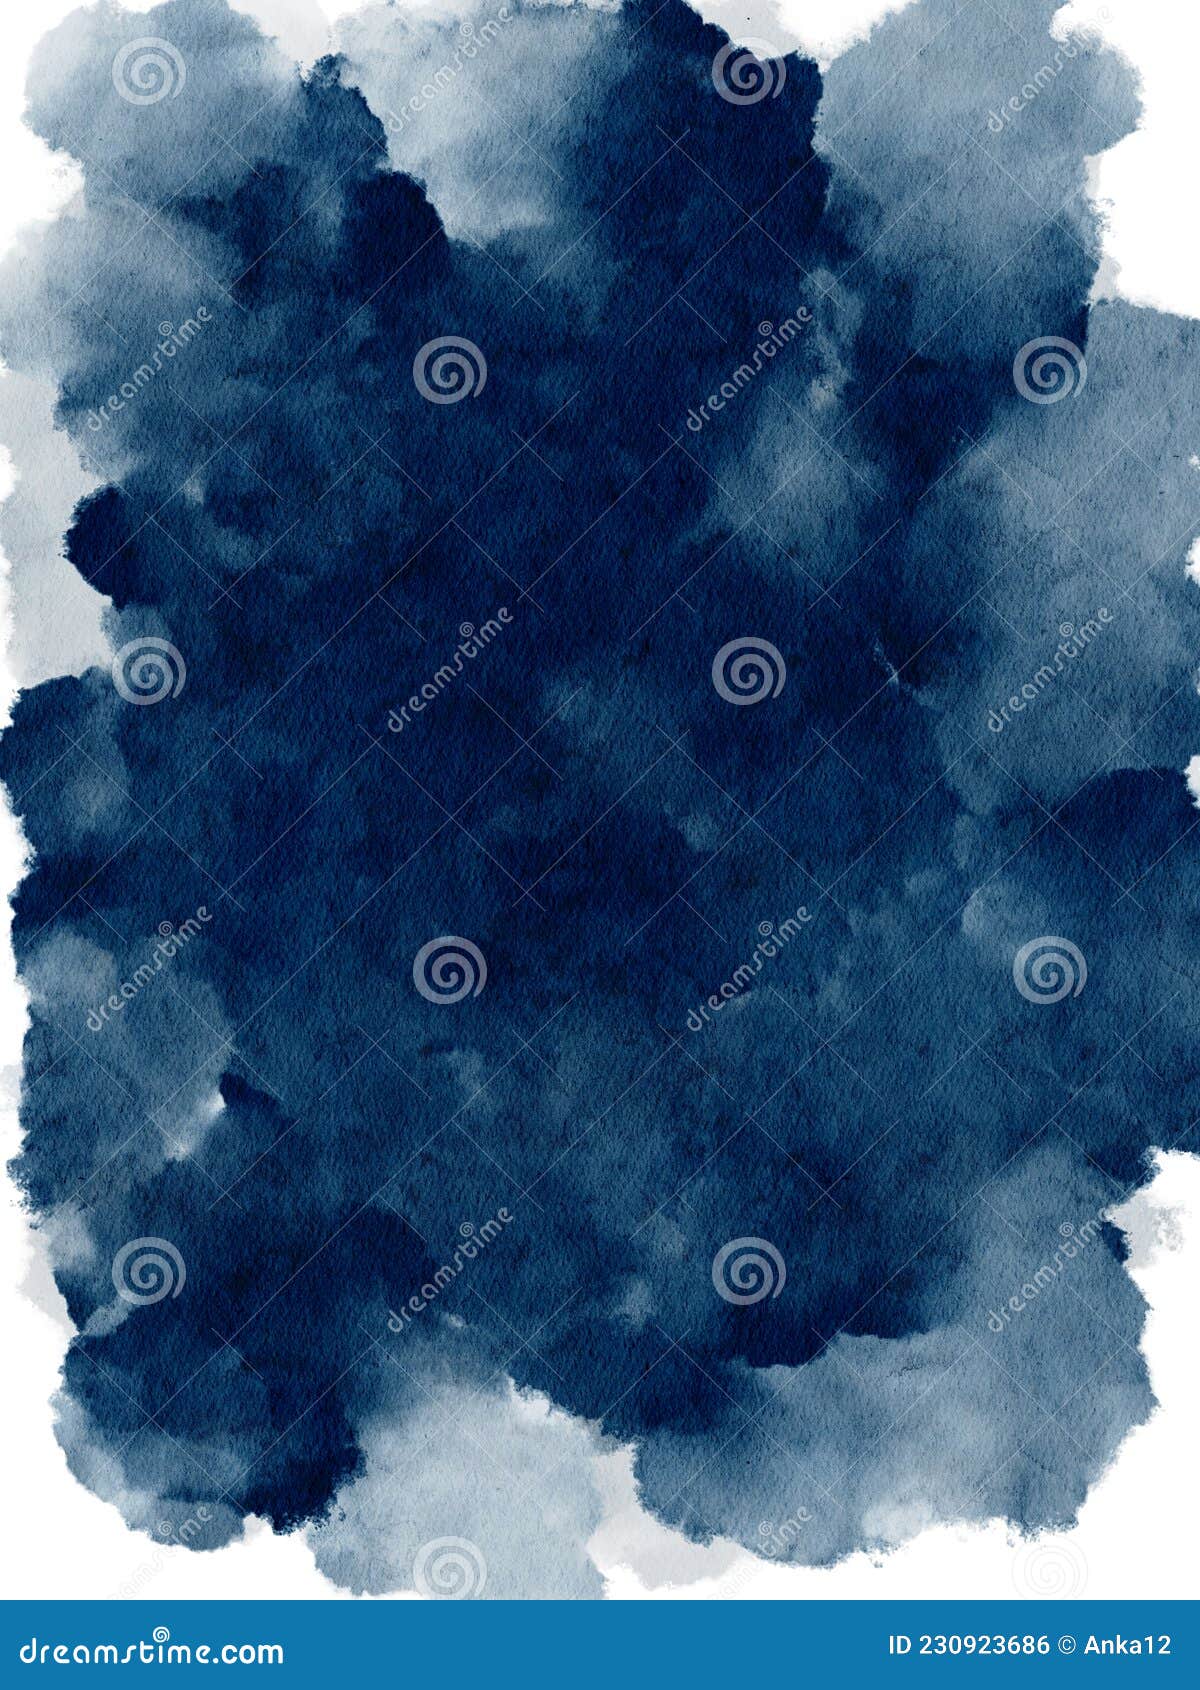 Watercolor Blue Navy Nautical Background. Abstract Paint Texture Stock ...